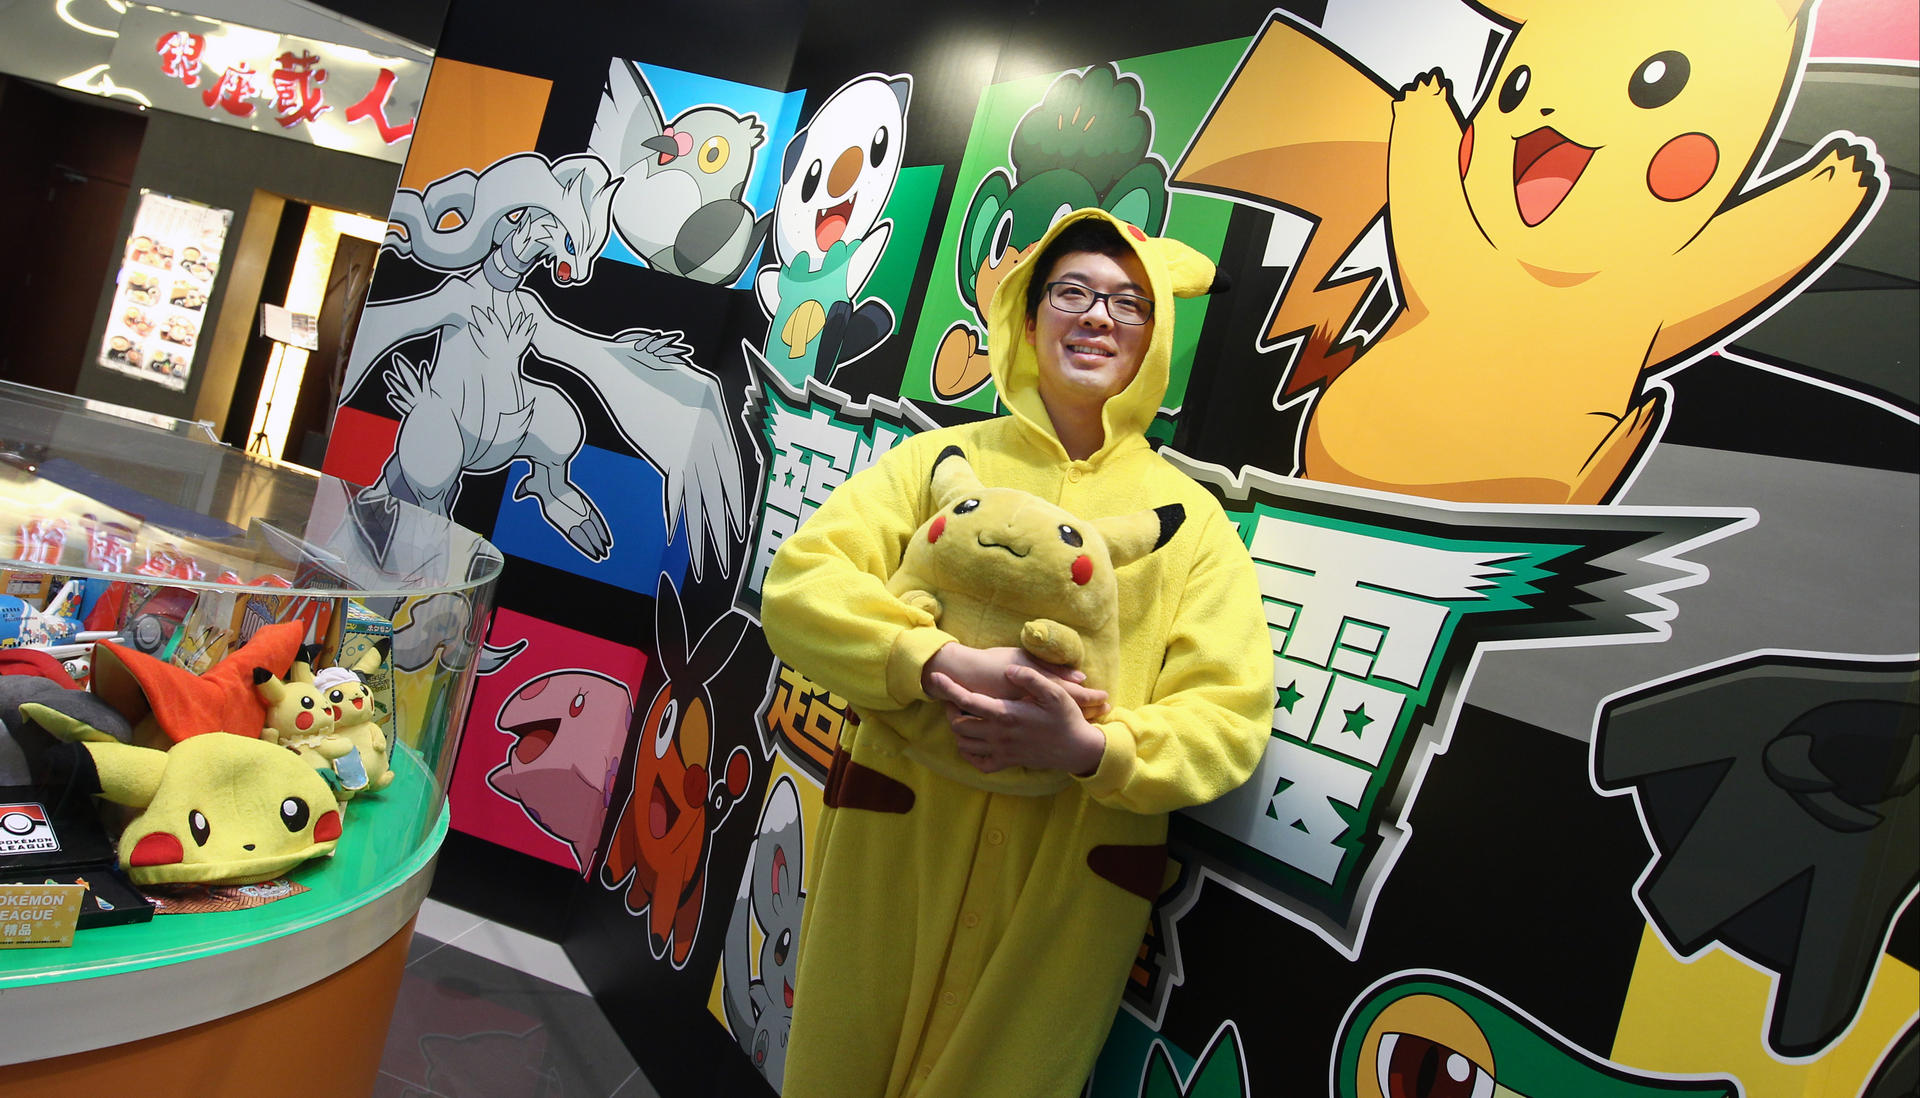 It's Pikachu power! - YP | South China Morning Post